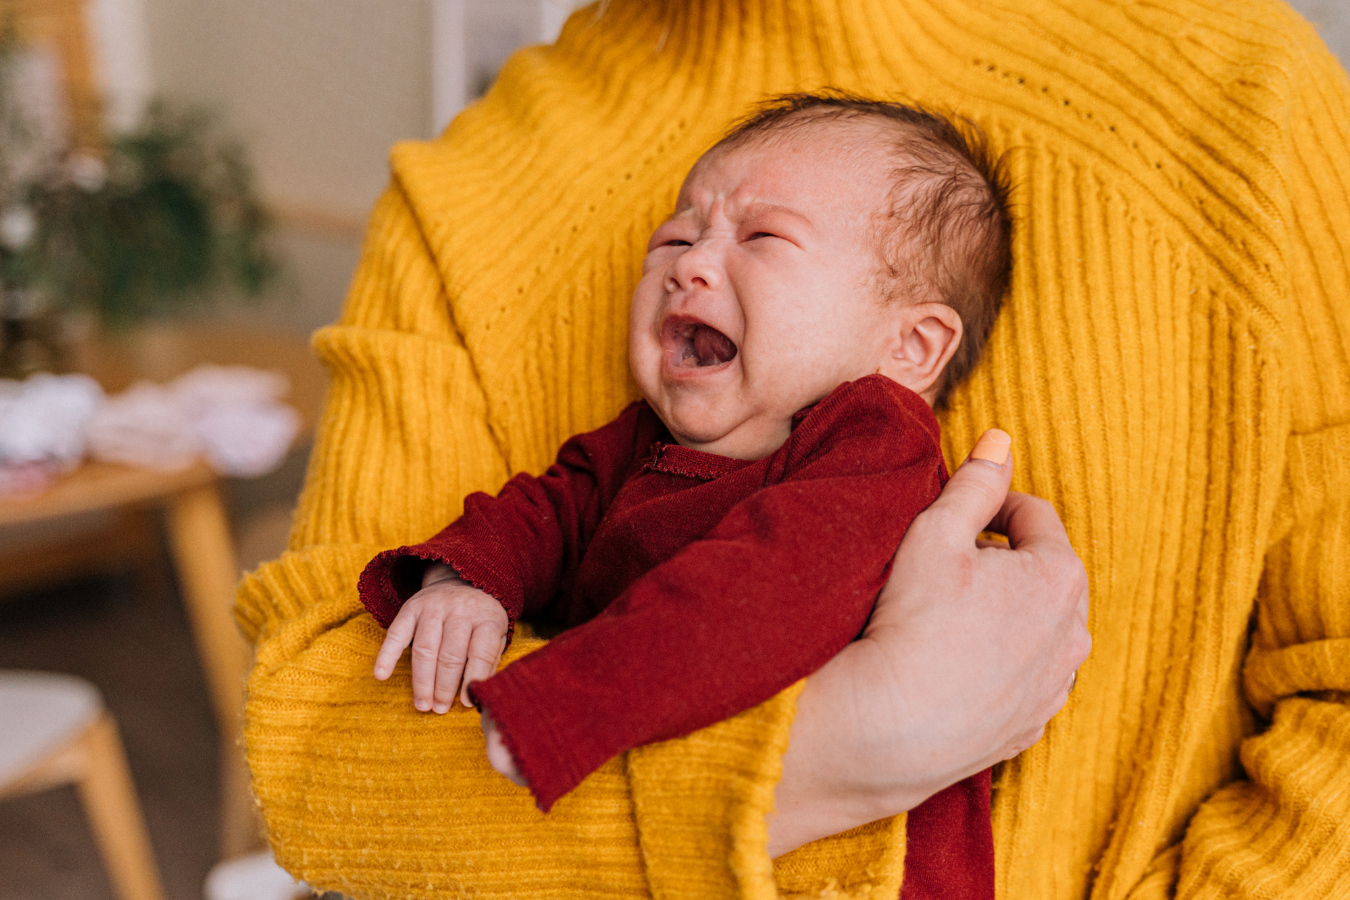 How to identify different cries of a baby